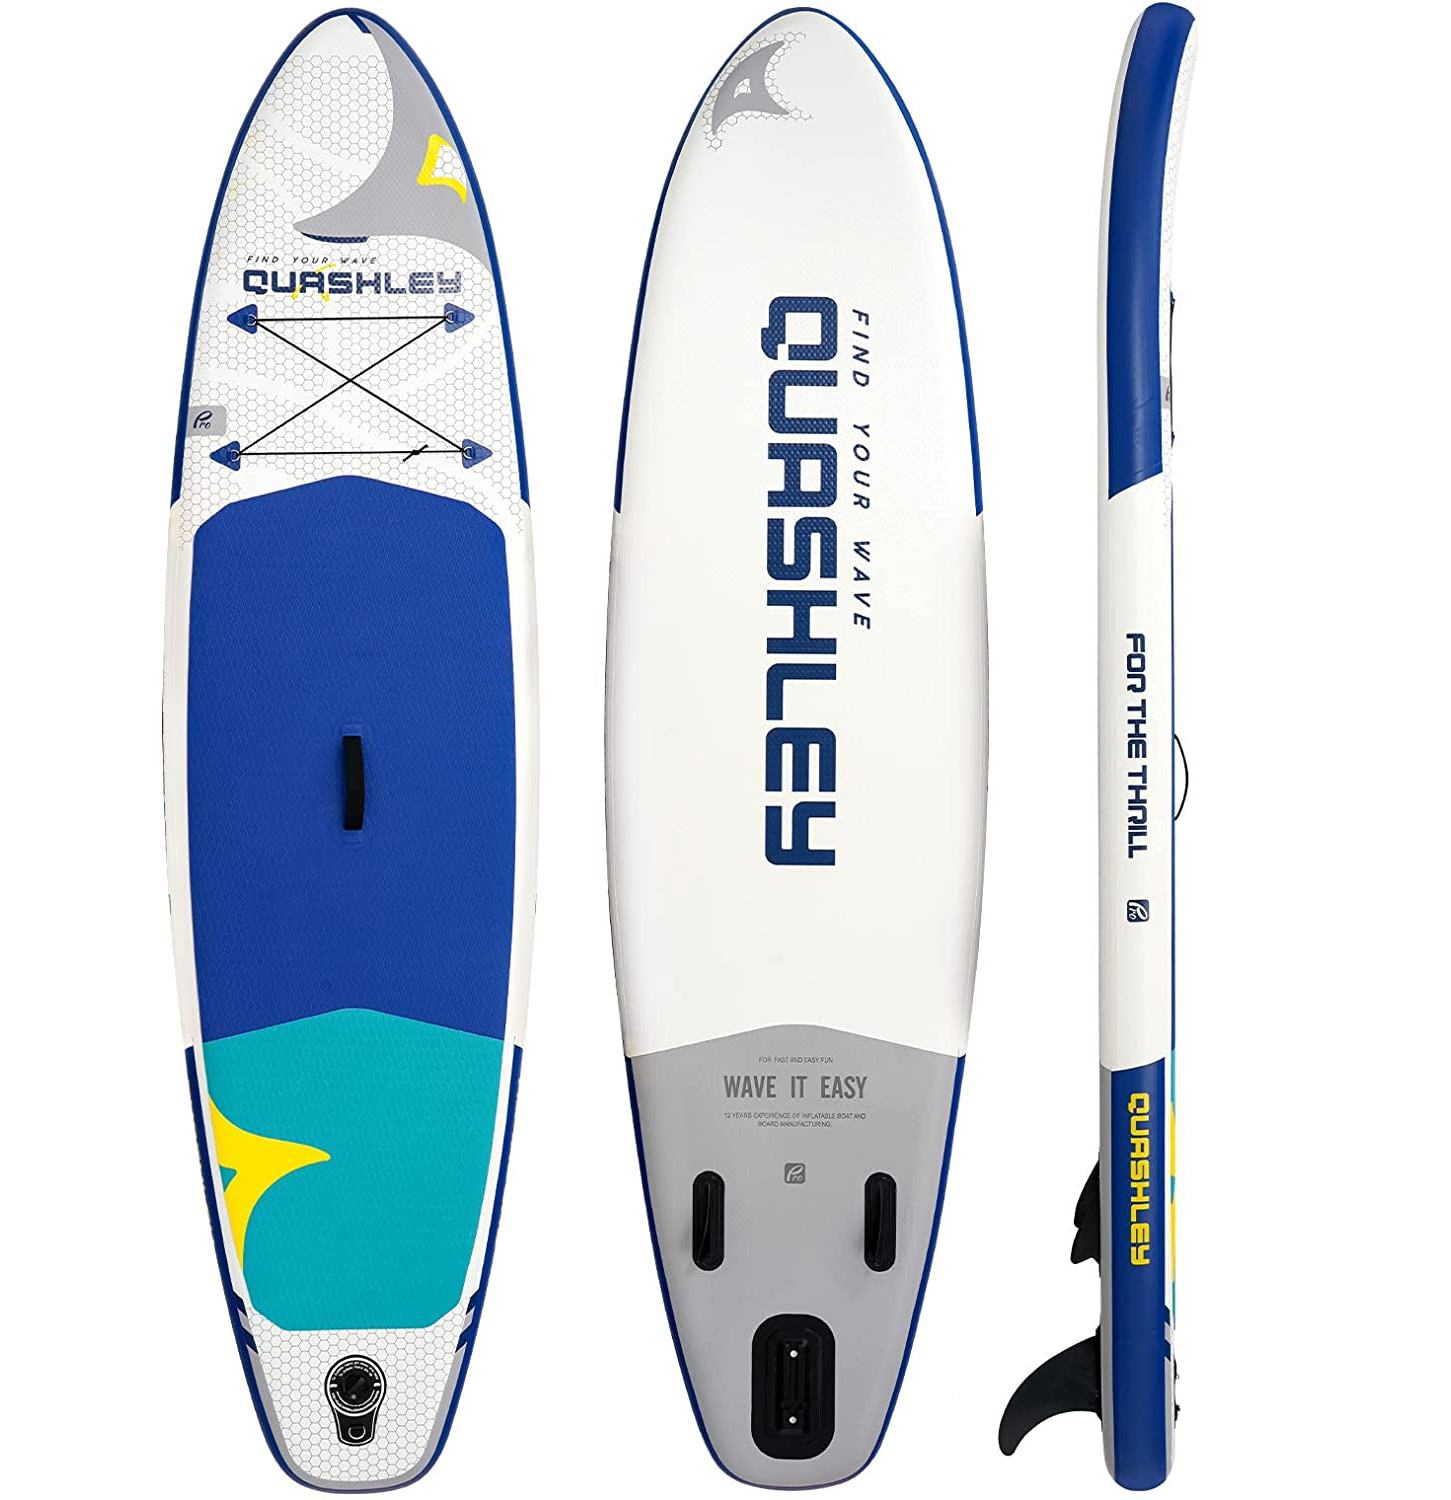 Quashley Inflatable Stand Up Paddle Board Surfboard with Premium SUP  Accessories